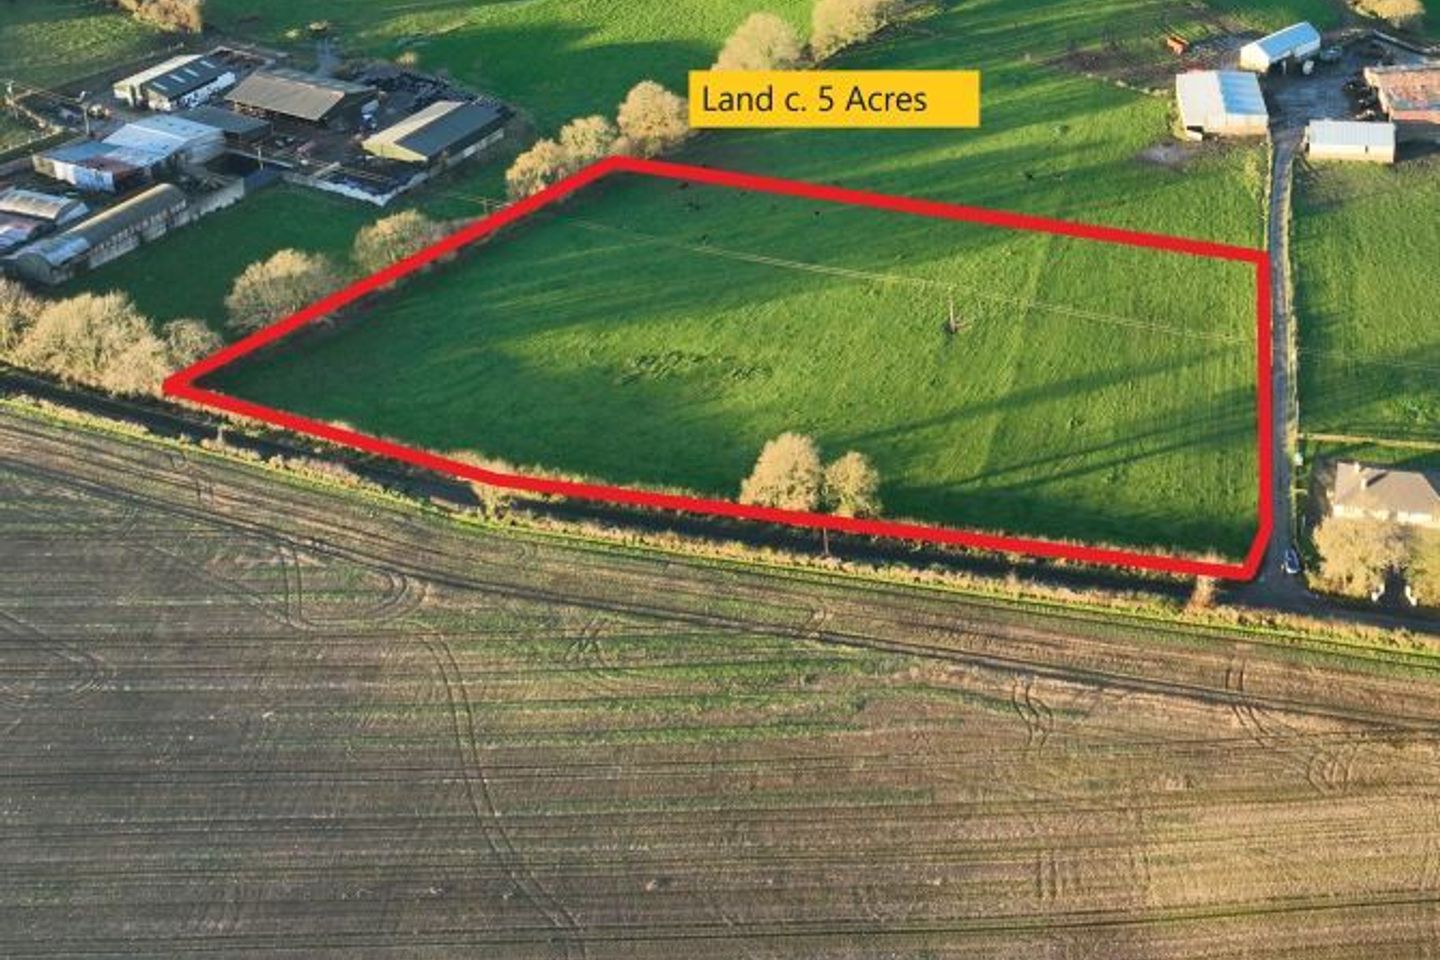 Land c. 5 Acres, Maplestown, Rathvilly, Co. Carlow